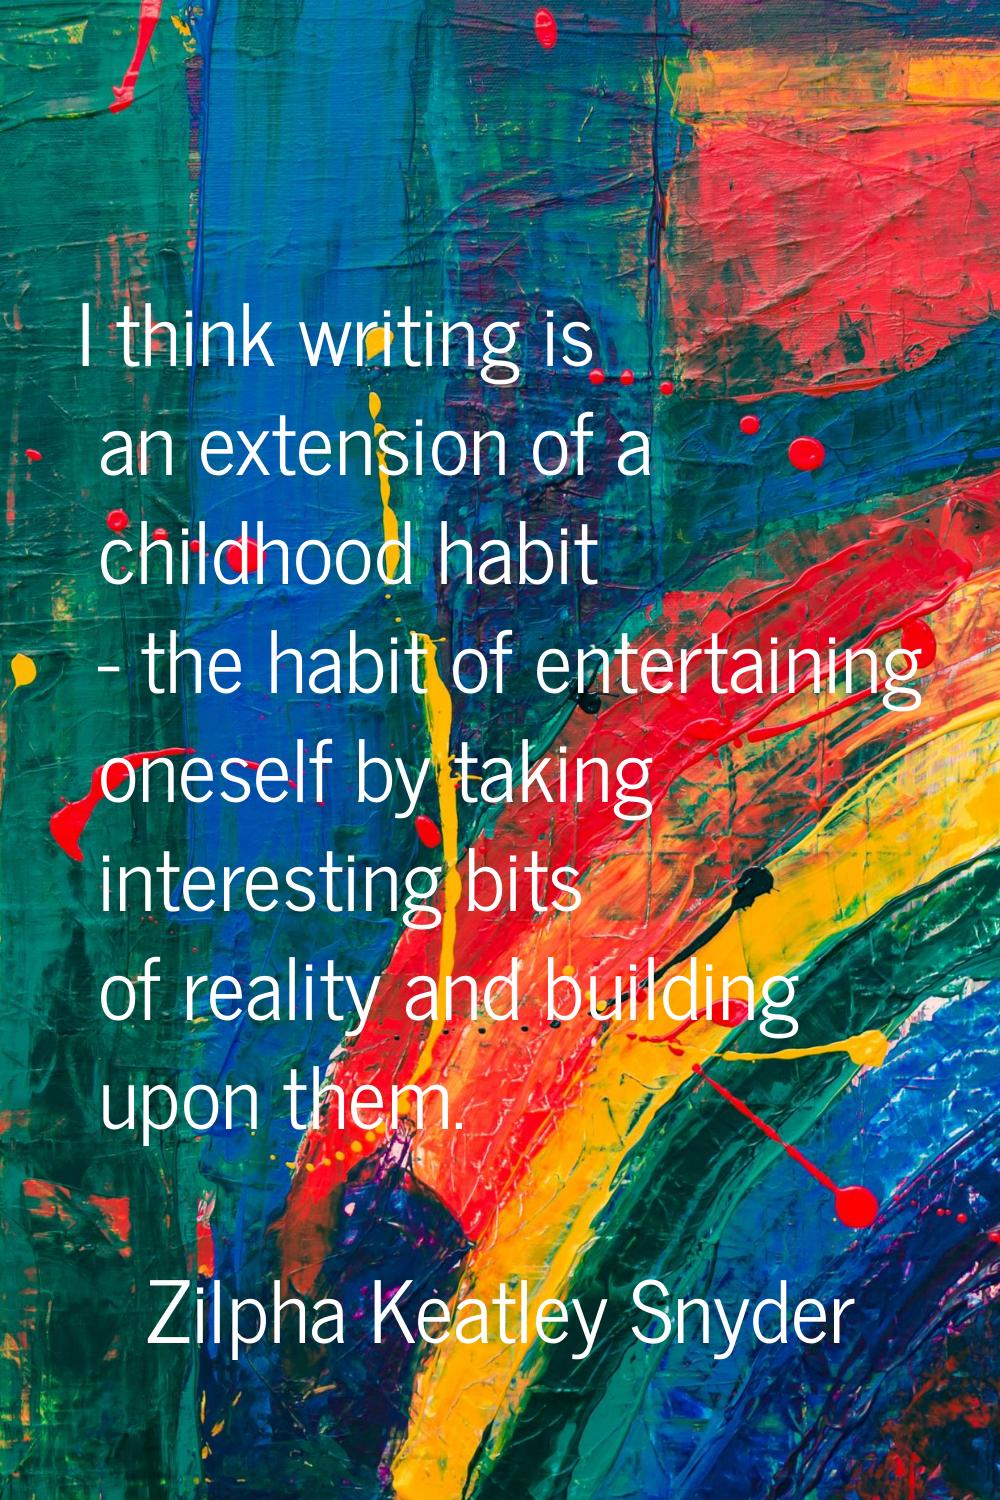 I think writing is an extension of a childhood habit - the habit of entertaining oneself by taking 